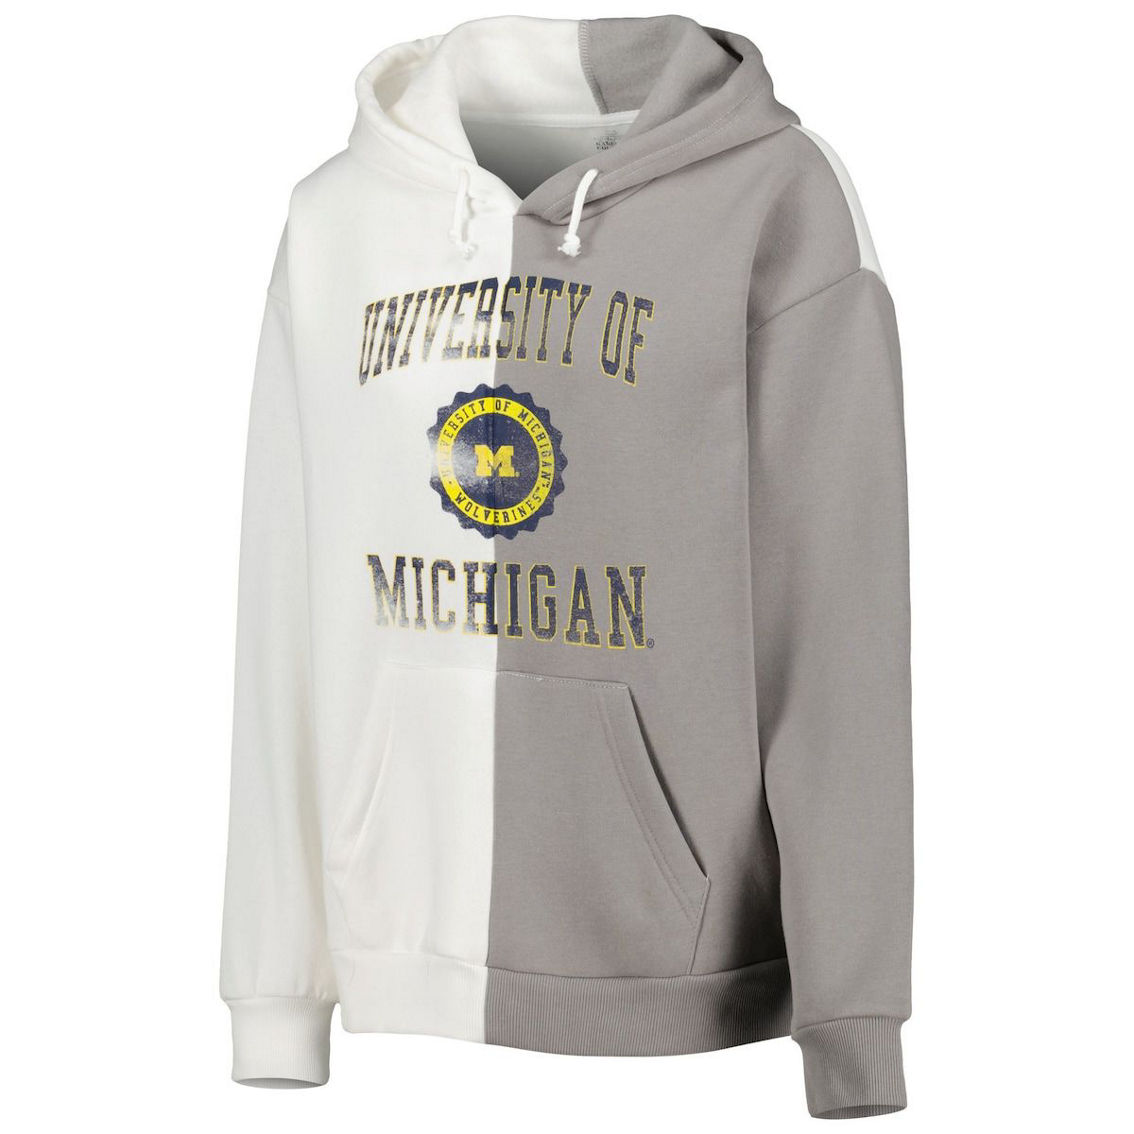 Gameday Couture Women's Gray/White Michigan Wolverines Split Pullover Hoodie - Image 3 of 4